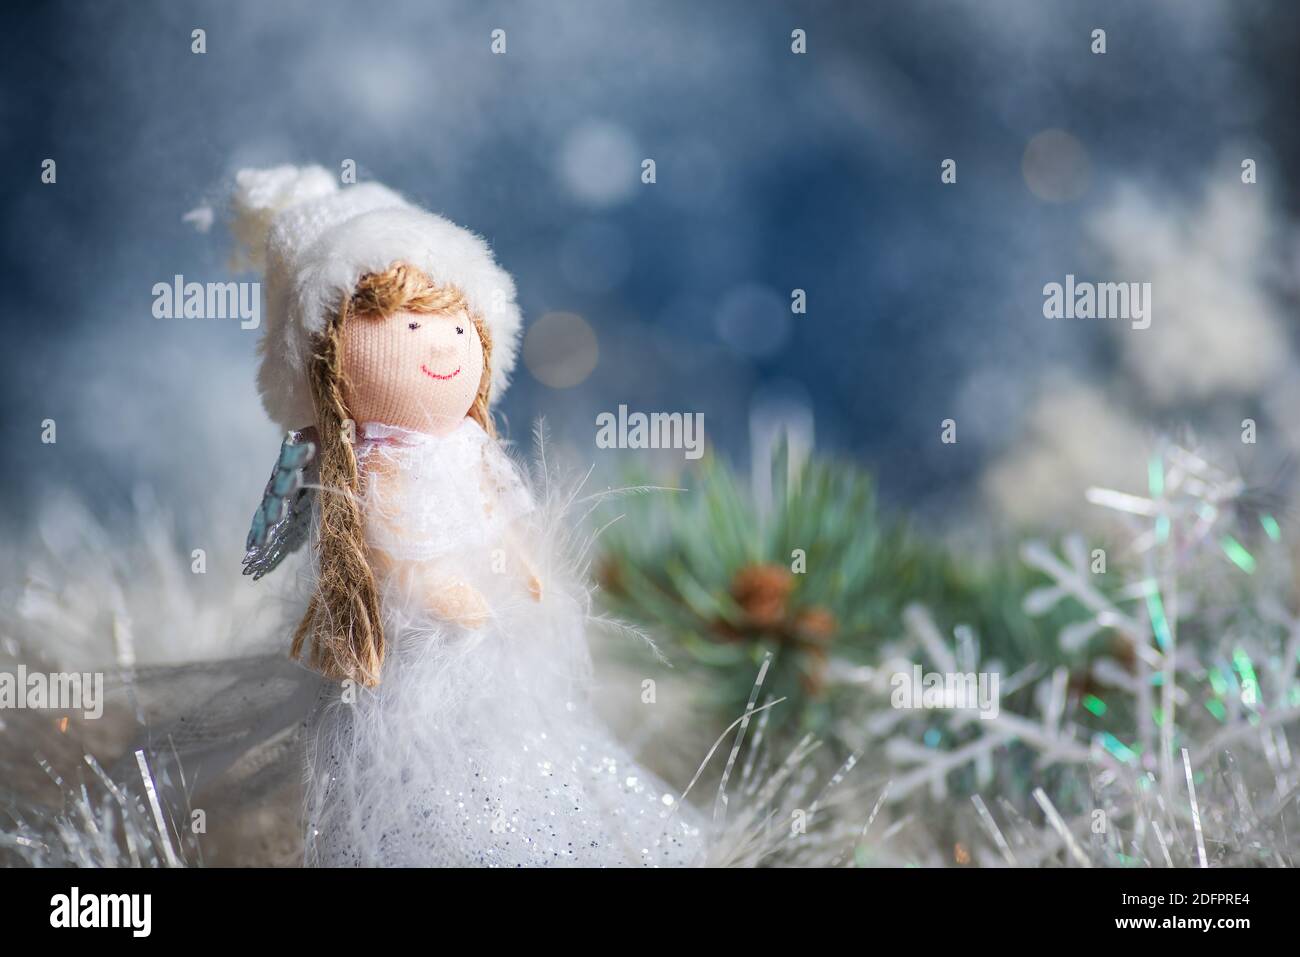 Toy angel and Christmas tree winter holiday festive background and ornaments Stock Photo